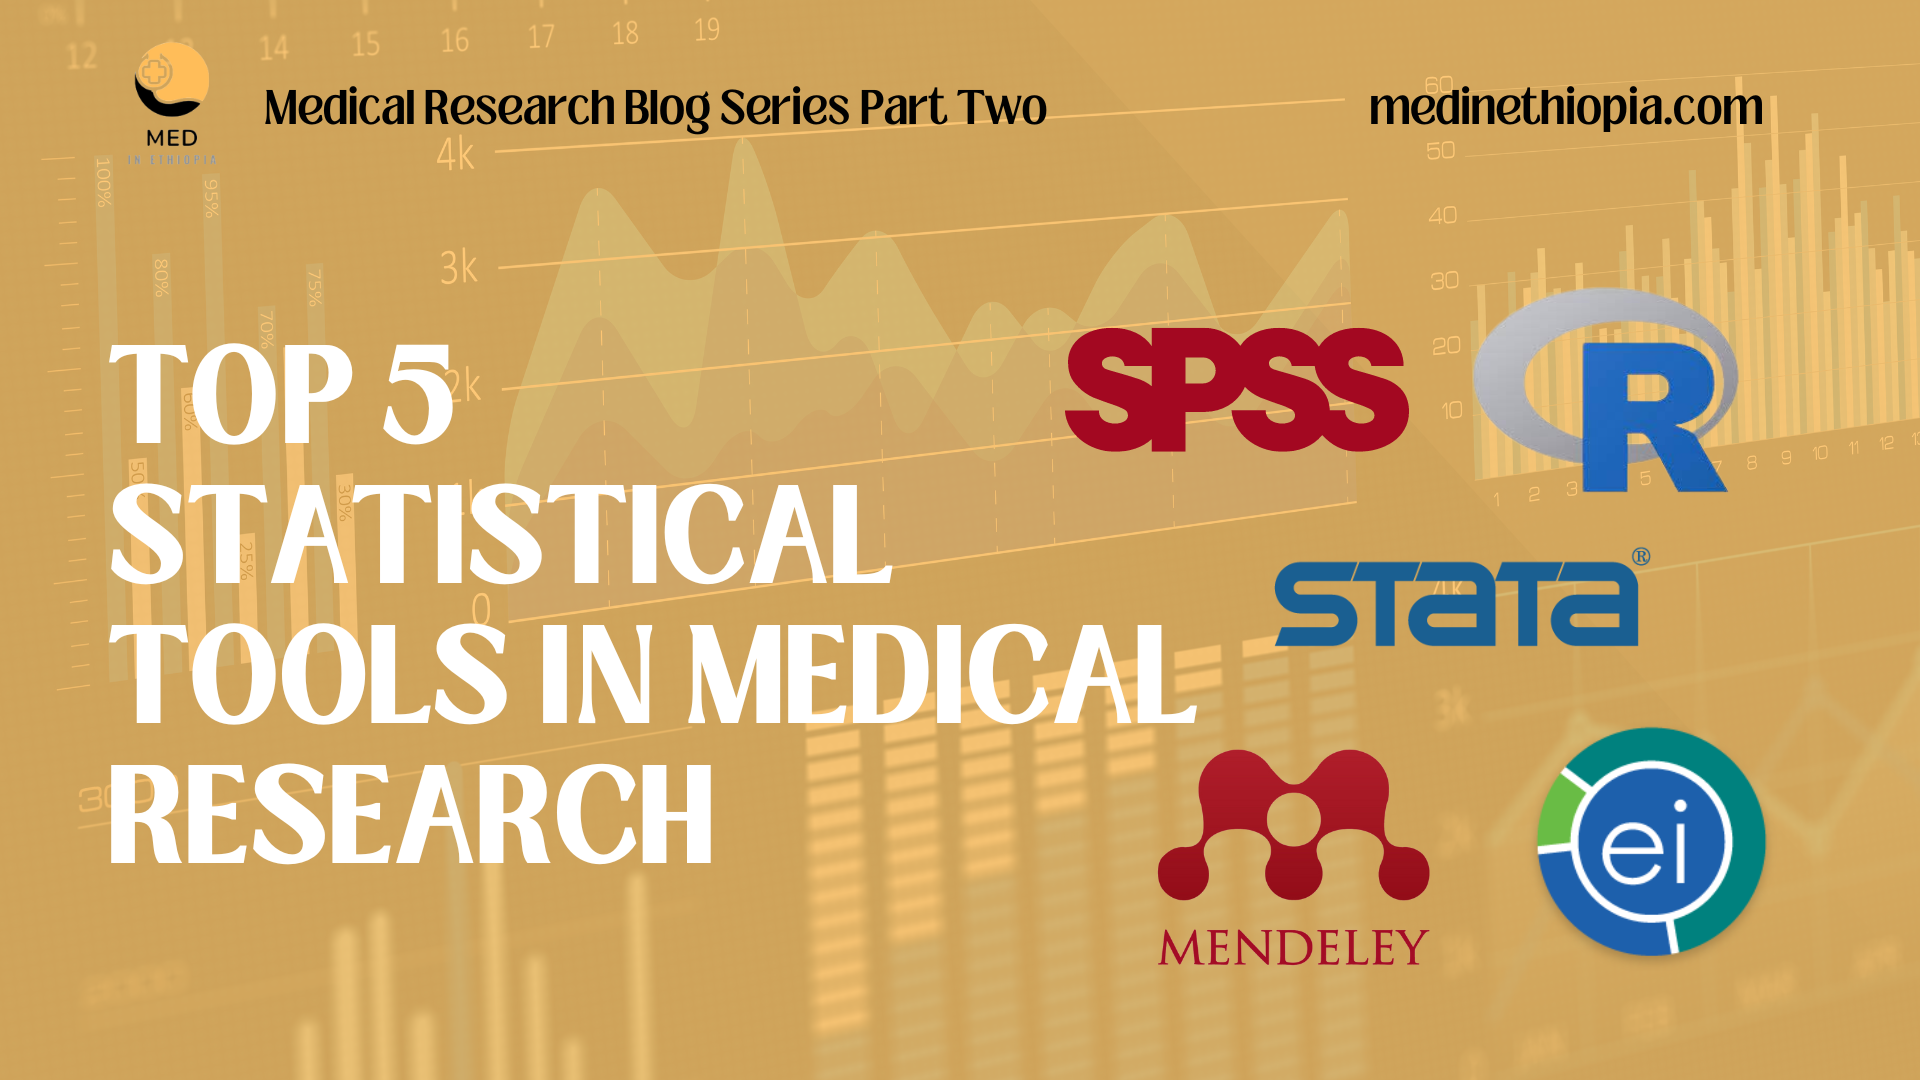 statistical methods in medical research author guidelines